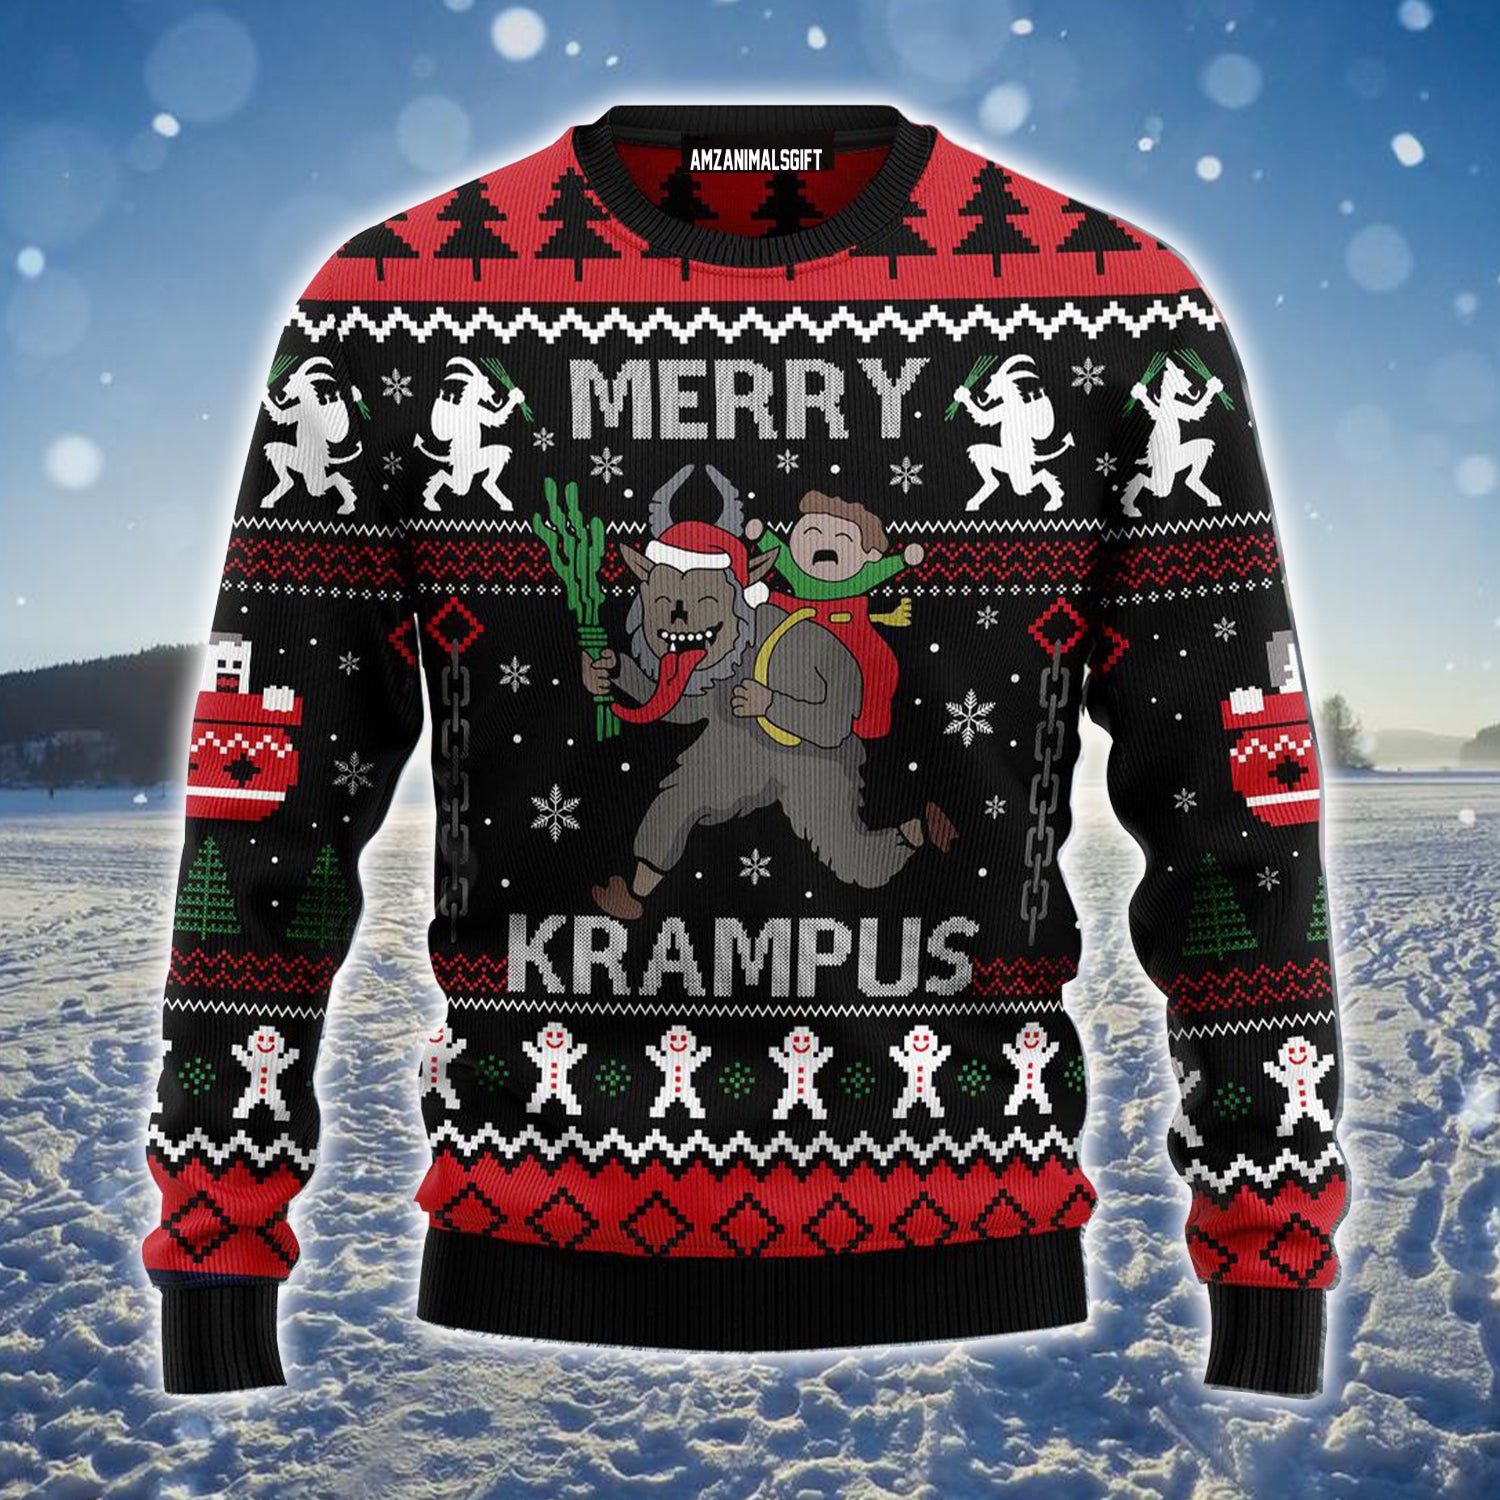 Merry Krampus Ugly Christmas Sweater, Christmas Pattern Ugly Sweater For Men & Women - Perfect Gift For Christmas, Family, Friends